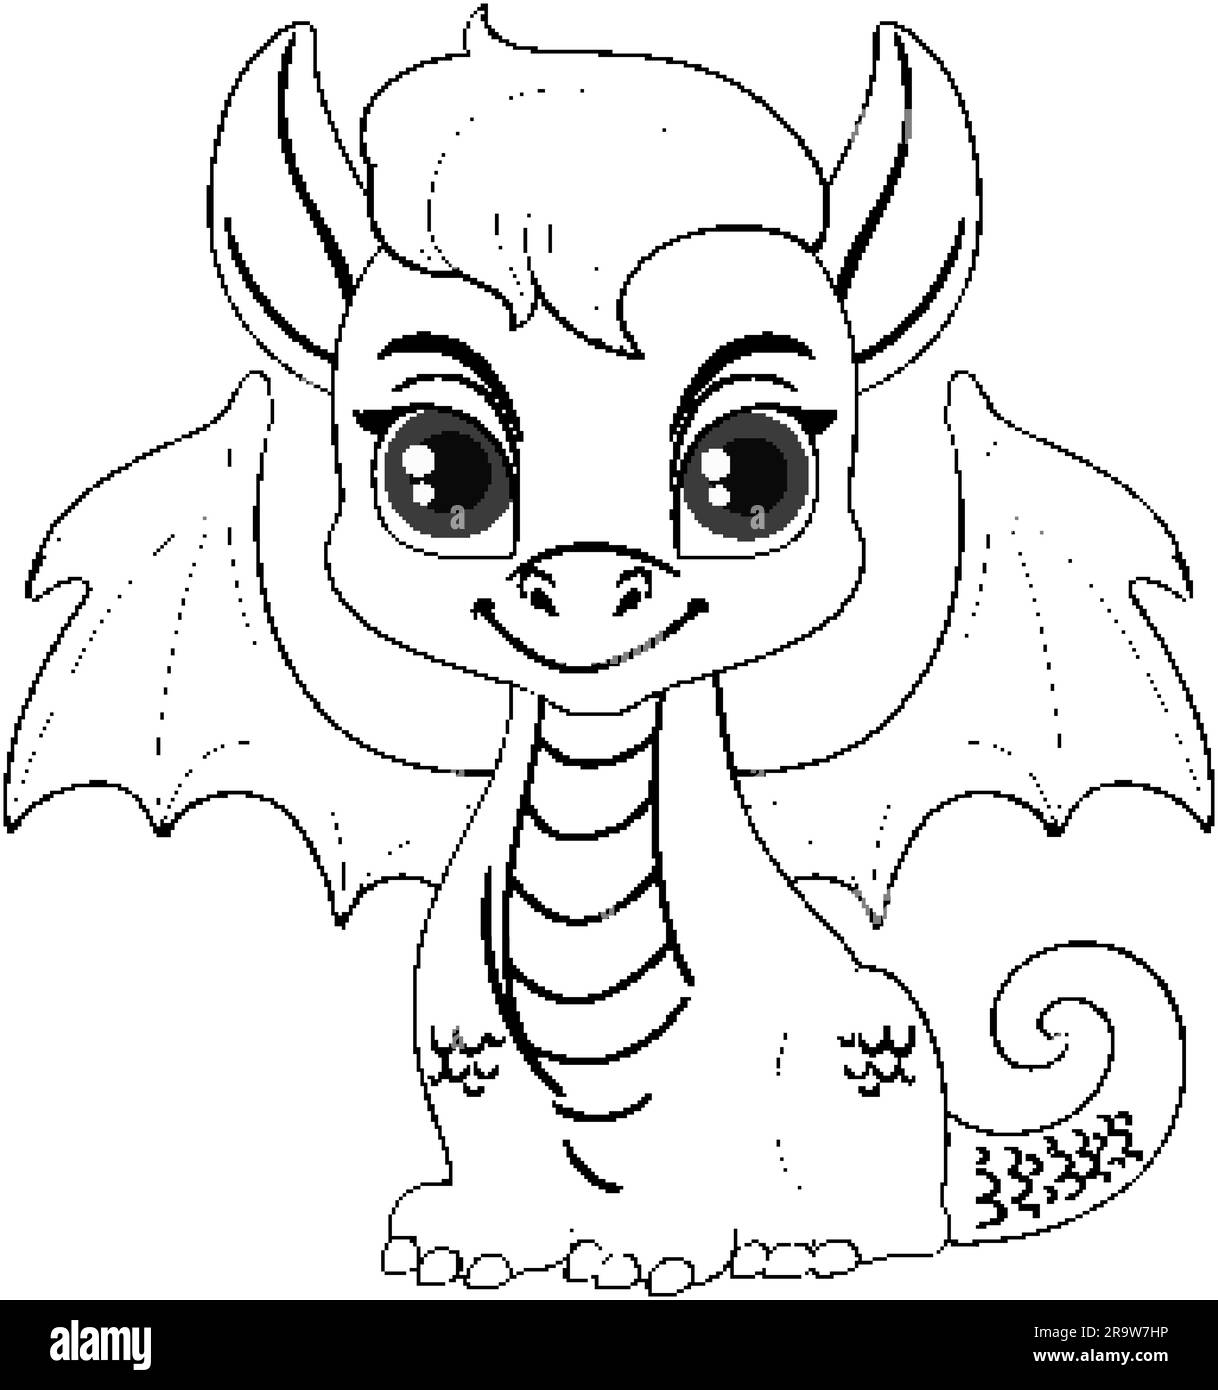 Coloring Page Outline of Cute Dragon illustration Stock Vector Image ...